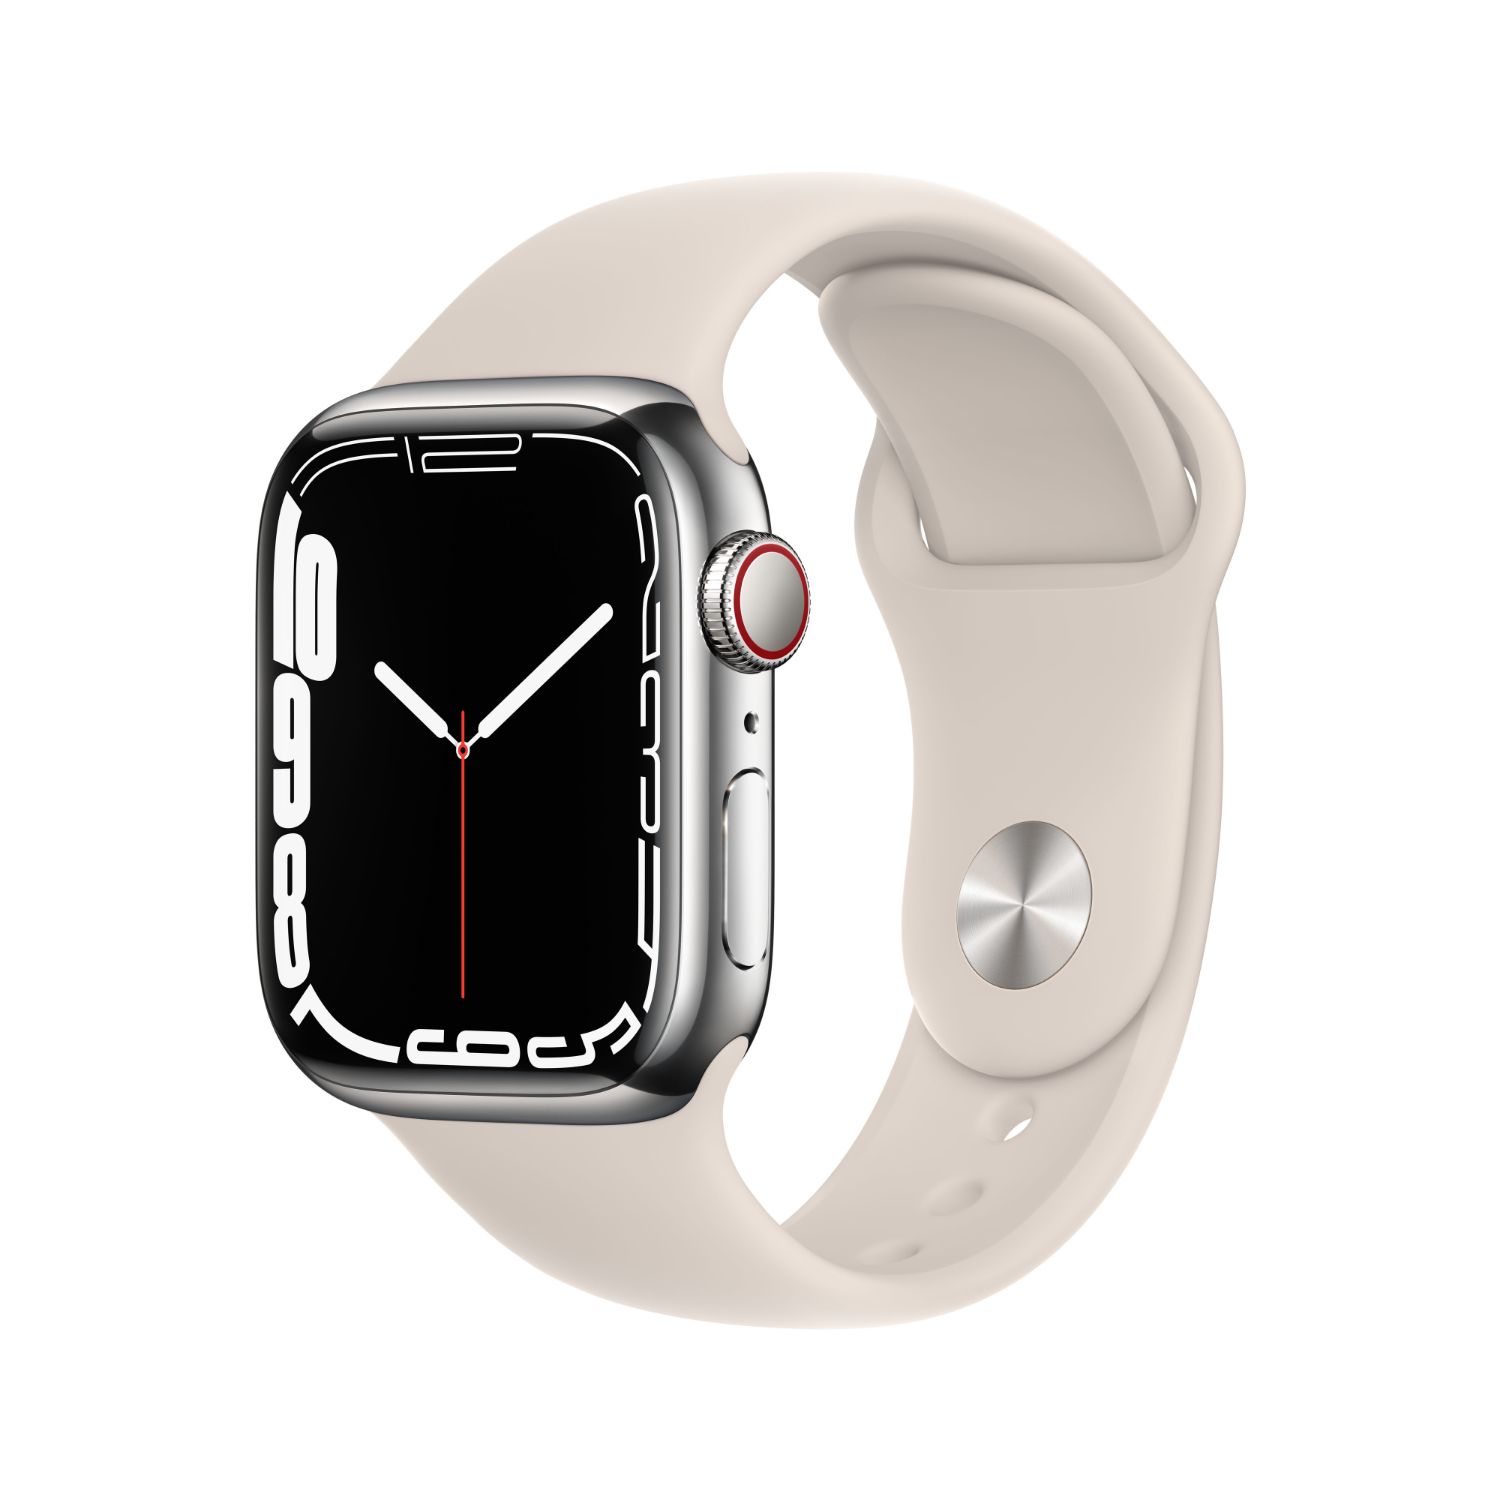 MKHW3TY/A - Apple Watch S7 OLED LTPO Tctil NFC Bluetooth 5.1 Cellular 4G GPS 41mm Acero Plata Correa Beige (MKHW3TY/A)